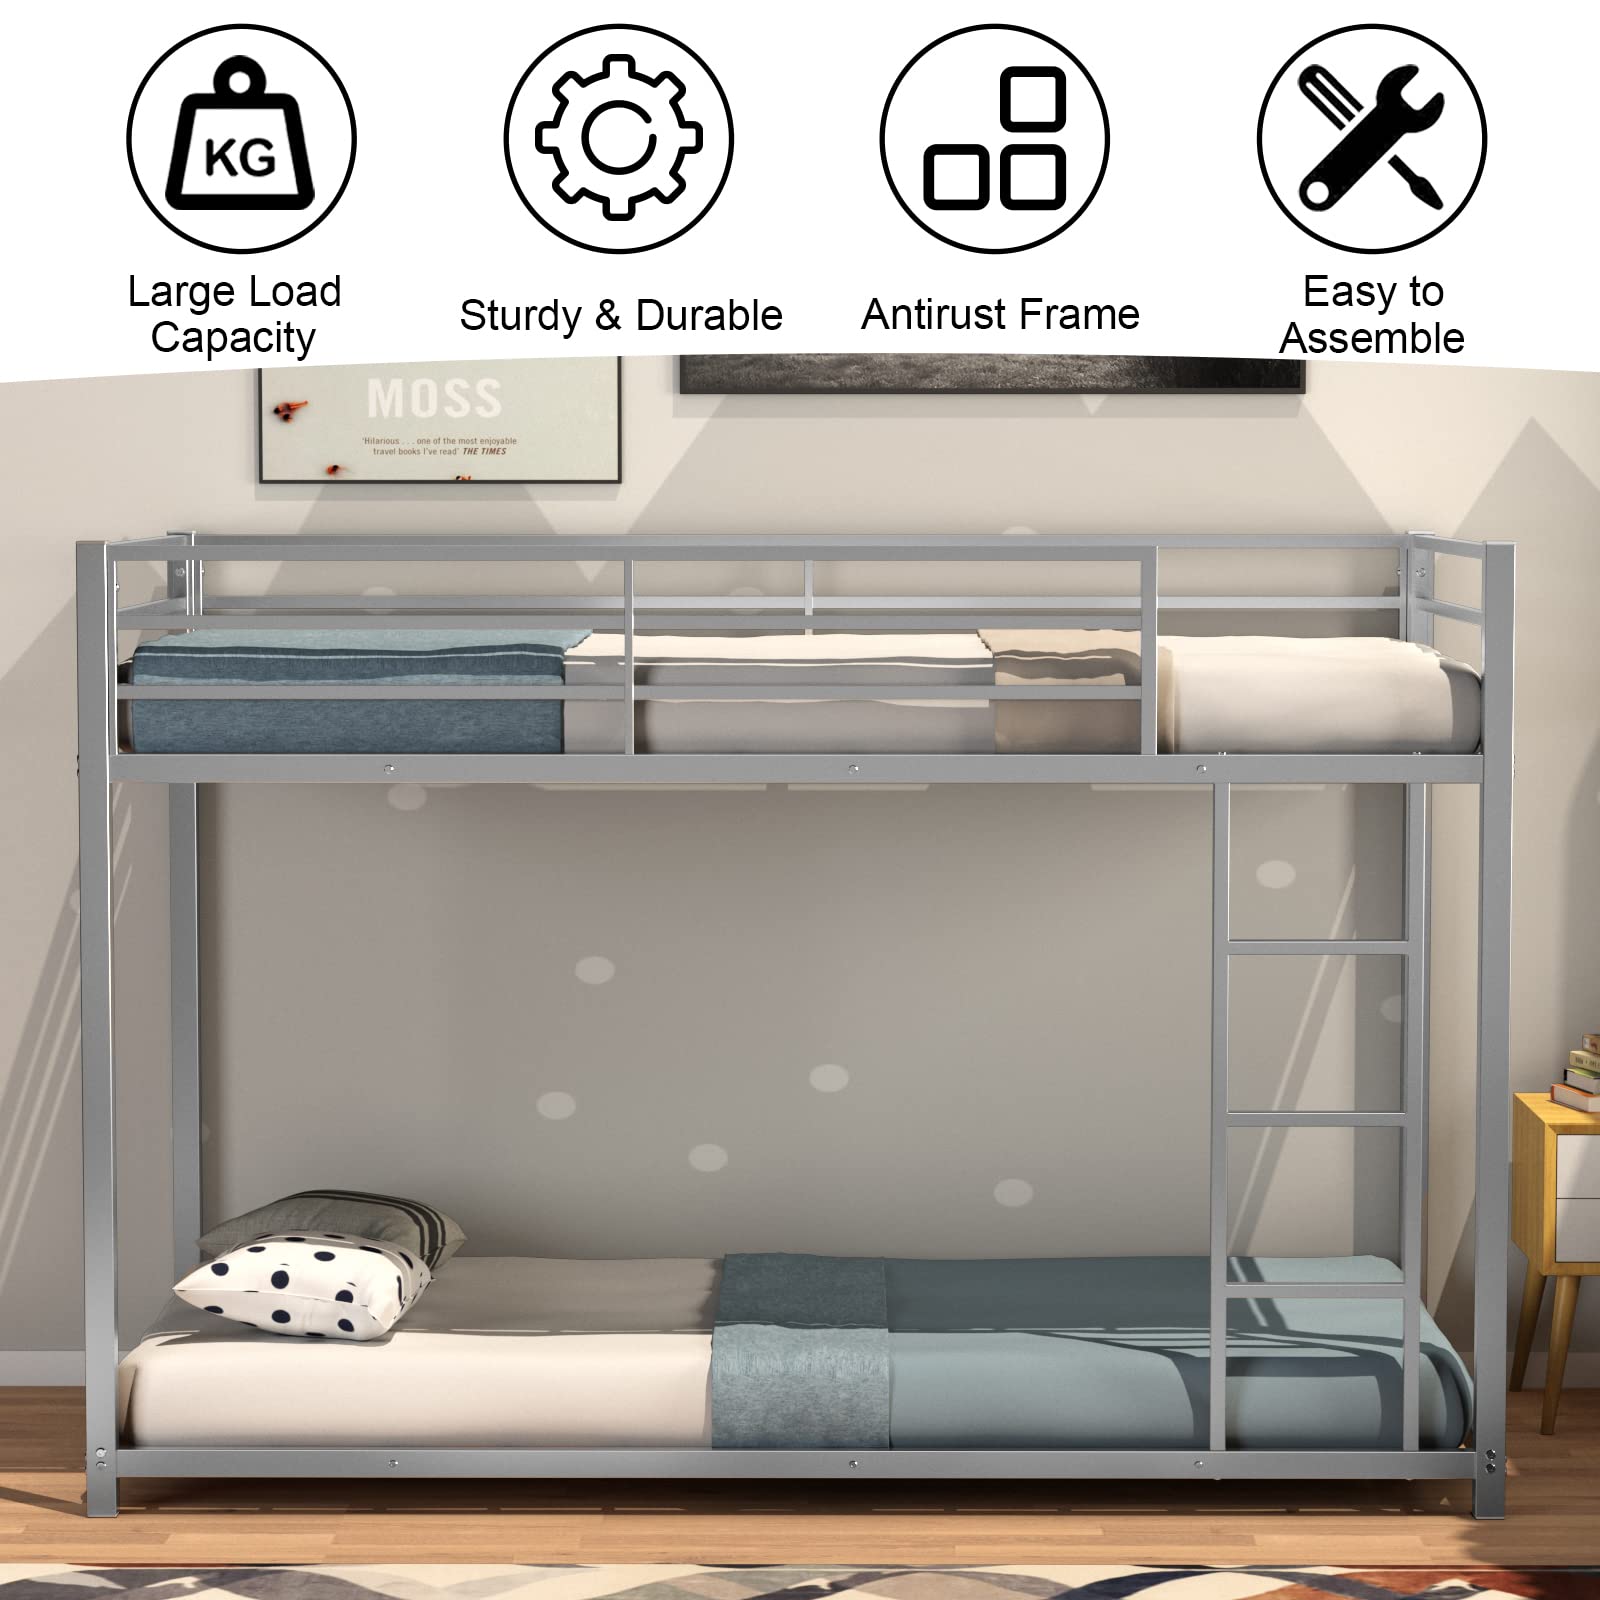 Giantex Metal Bunk Bed Twin Over Twin, Low Profile Bunk Bed Frame with Ladder & Full Length Guardrail